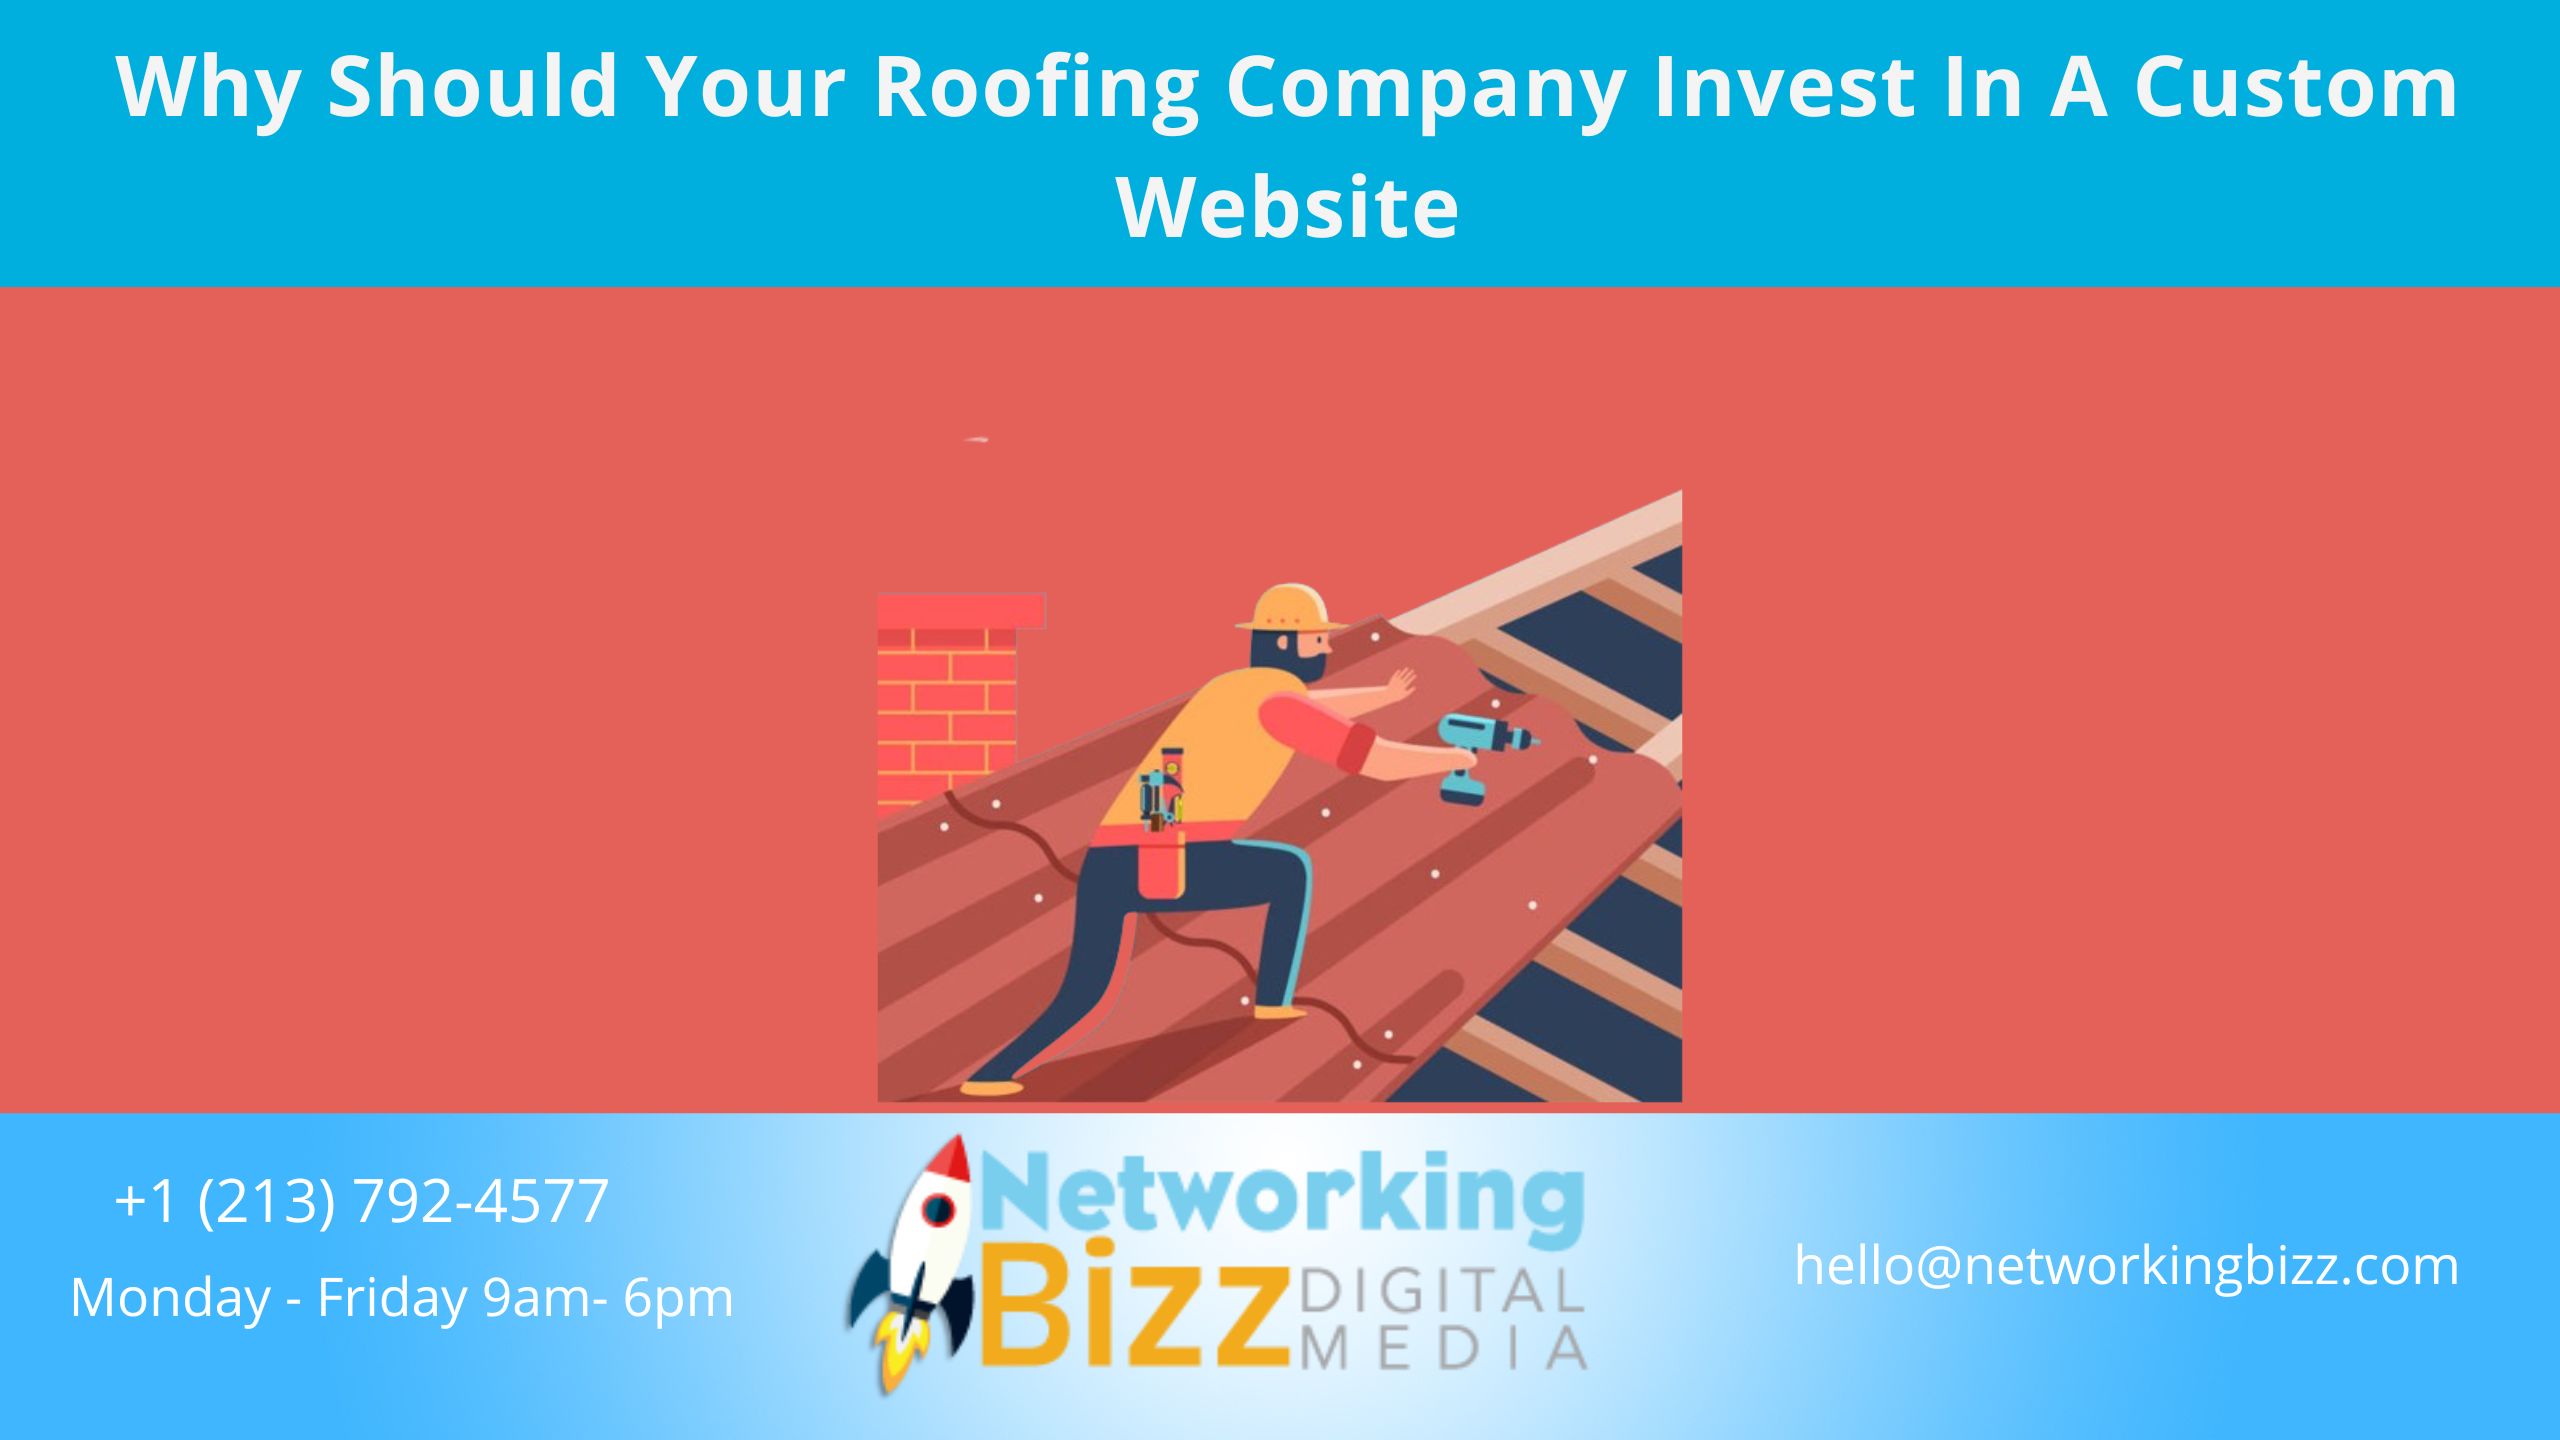 Why Should Your Roofing Company Invest In A Custom Website